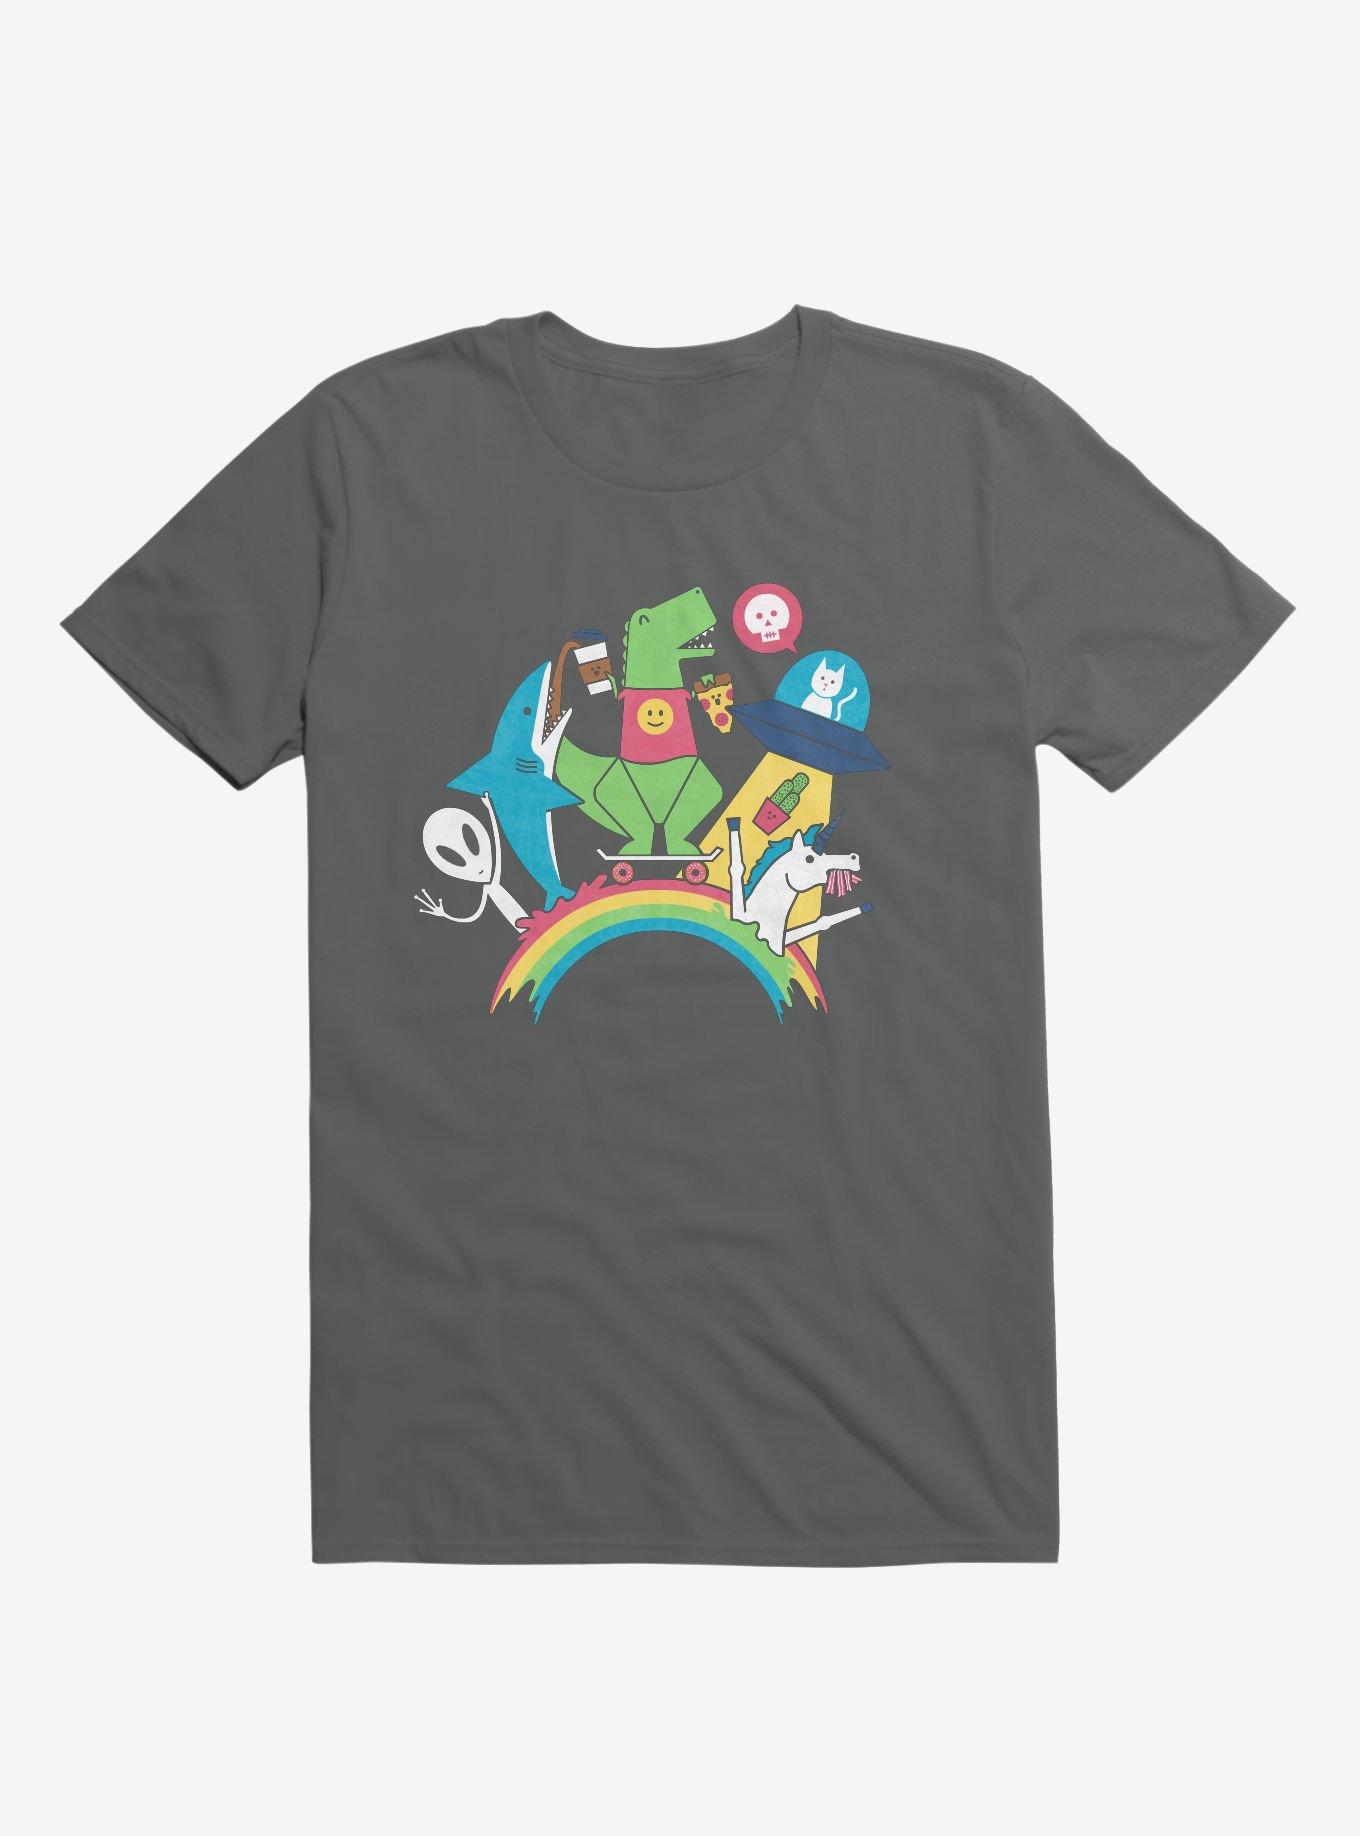 FTW Rainbow Party Charcoal Grey T-Shirt